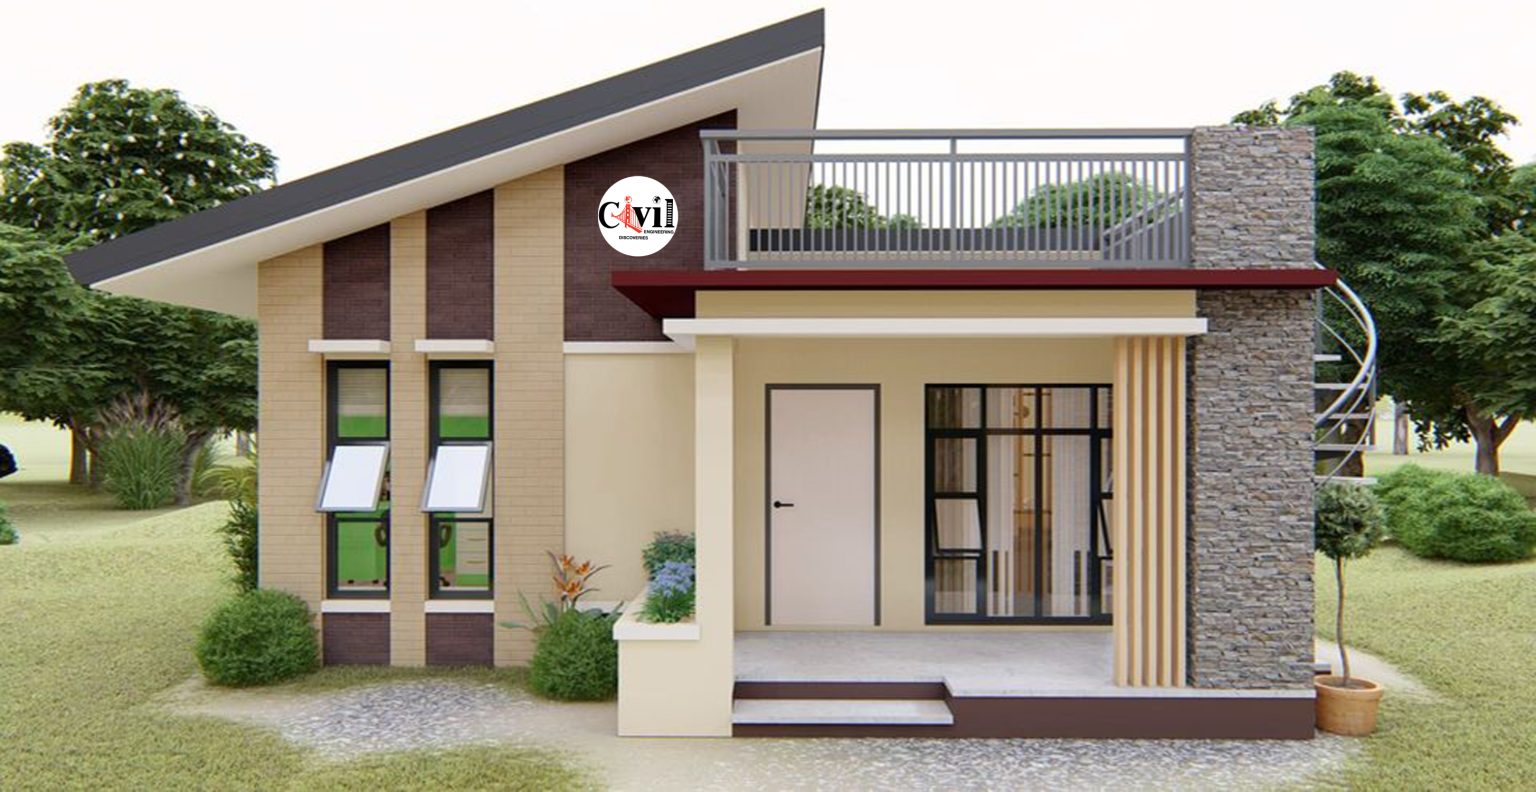 80 SQ.M. Modern Bungalow House Design With Roof Deck - Engineering